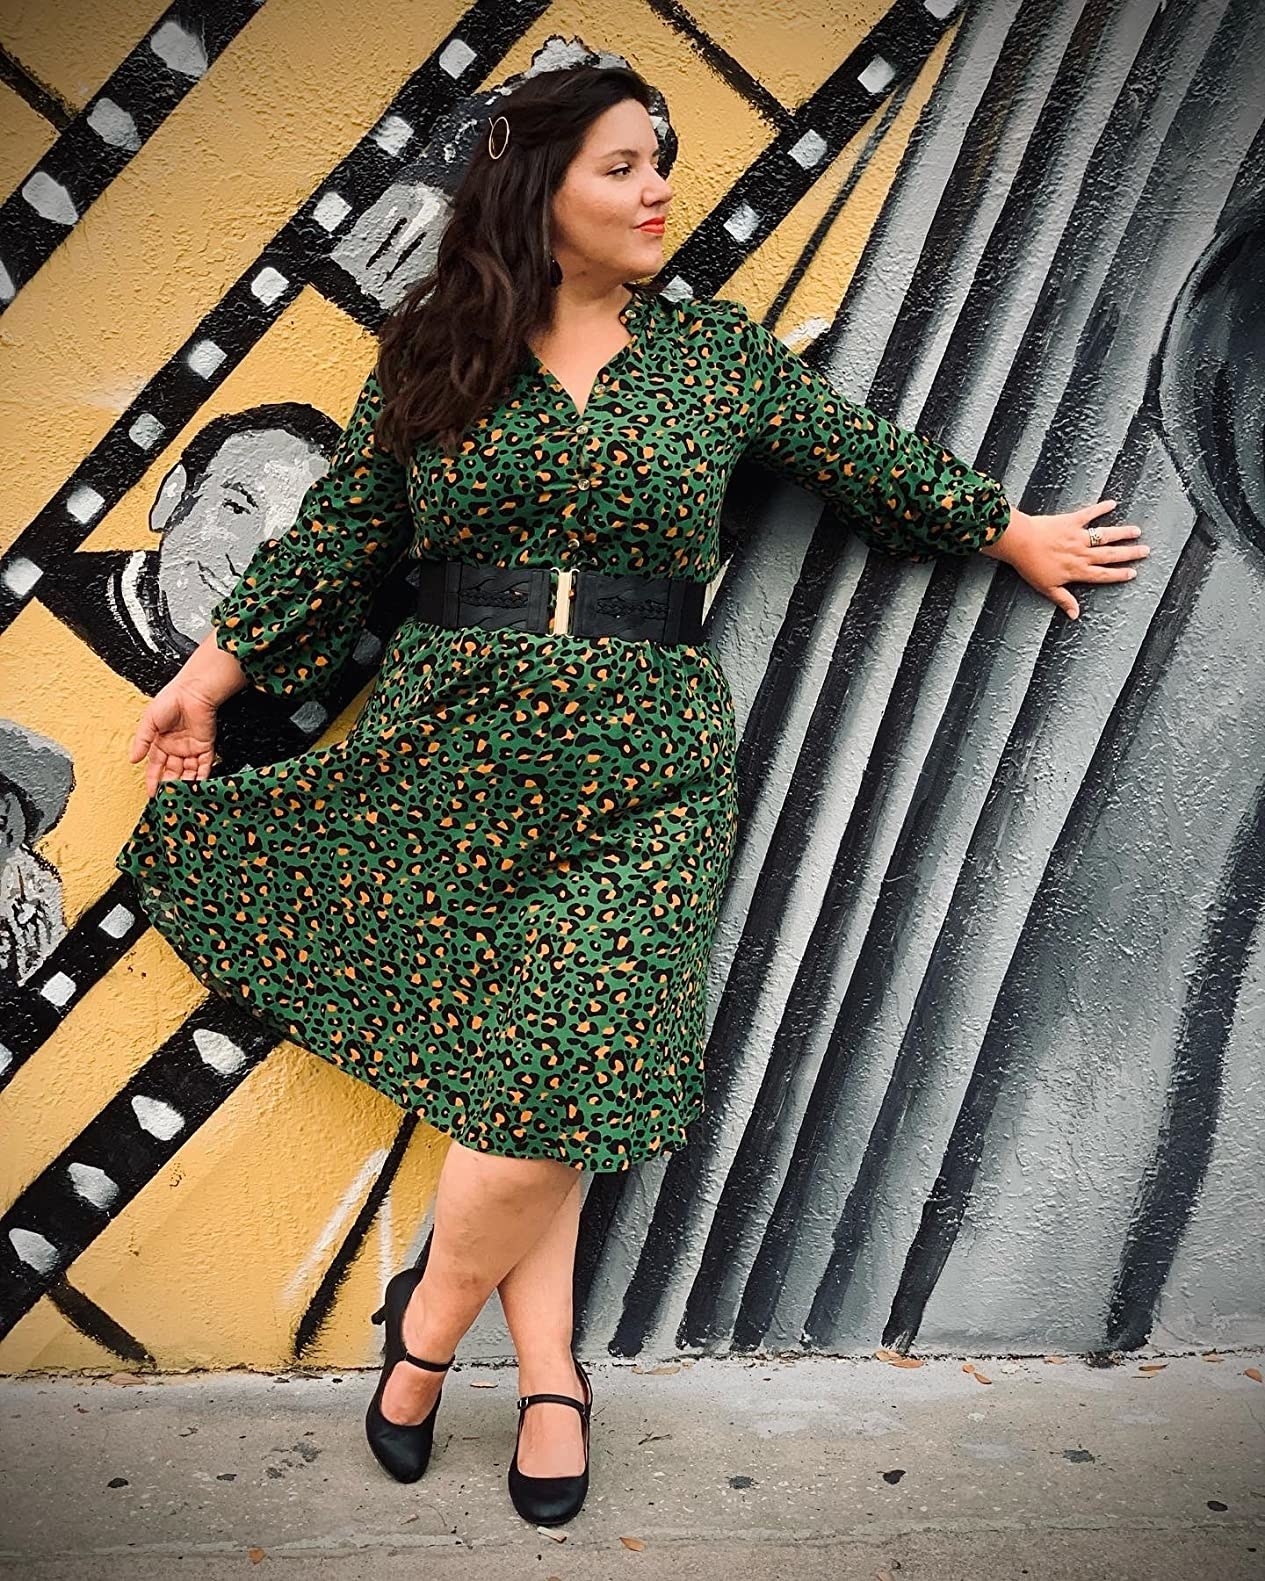 Reviewer wearing the dress in green leopard print